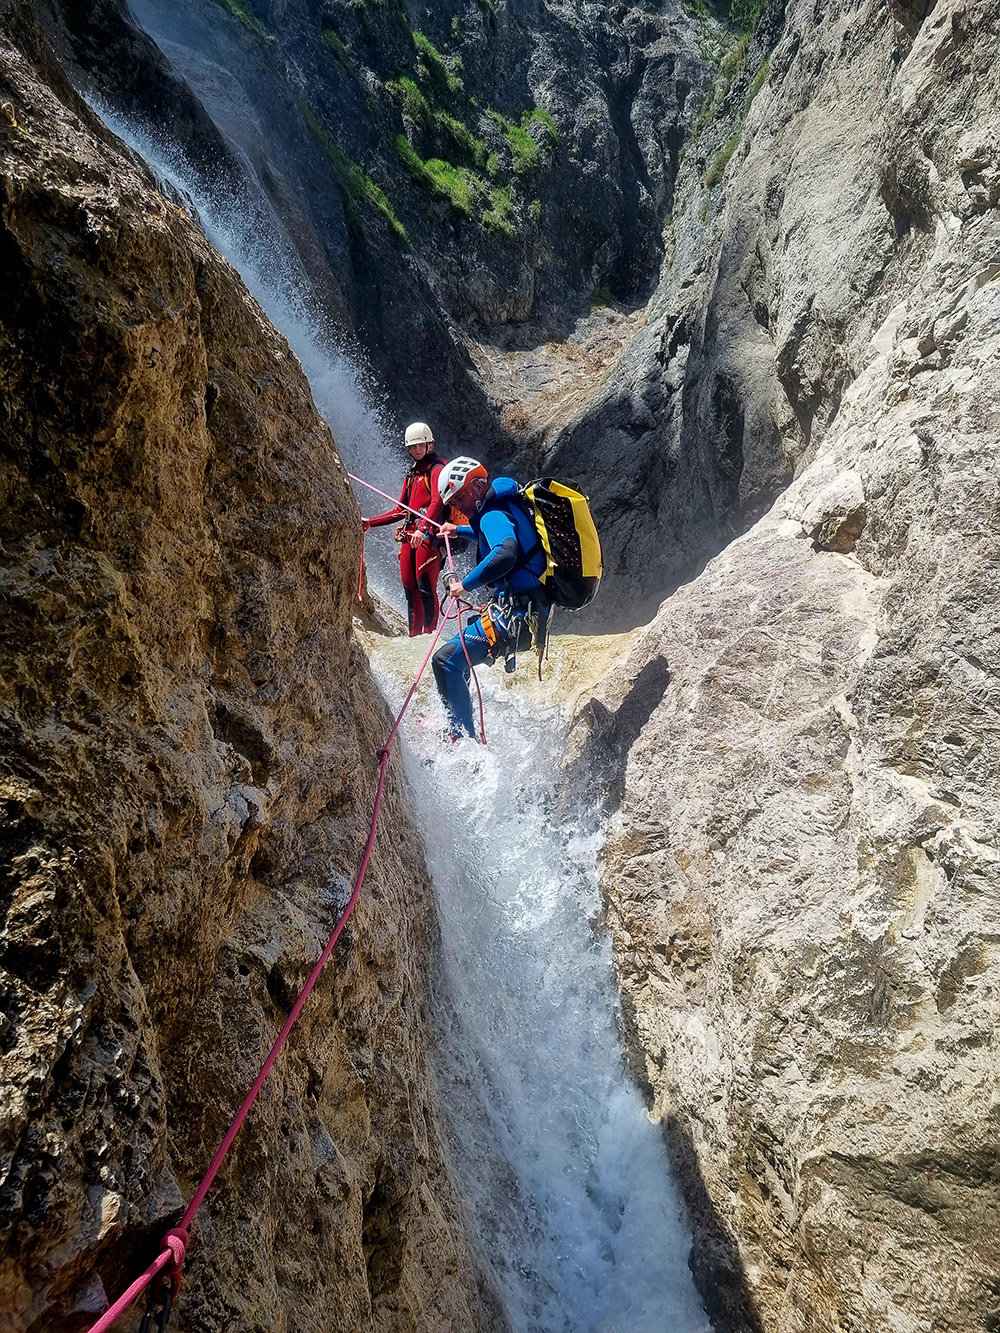 Paul guiding clients down a waterfall during canyoning in Fischbachklamm. Canyoning in Salzburg with Paul Murray. Guided Canyoning Tours for small groups only.